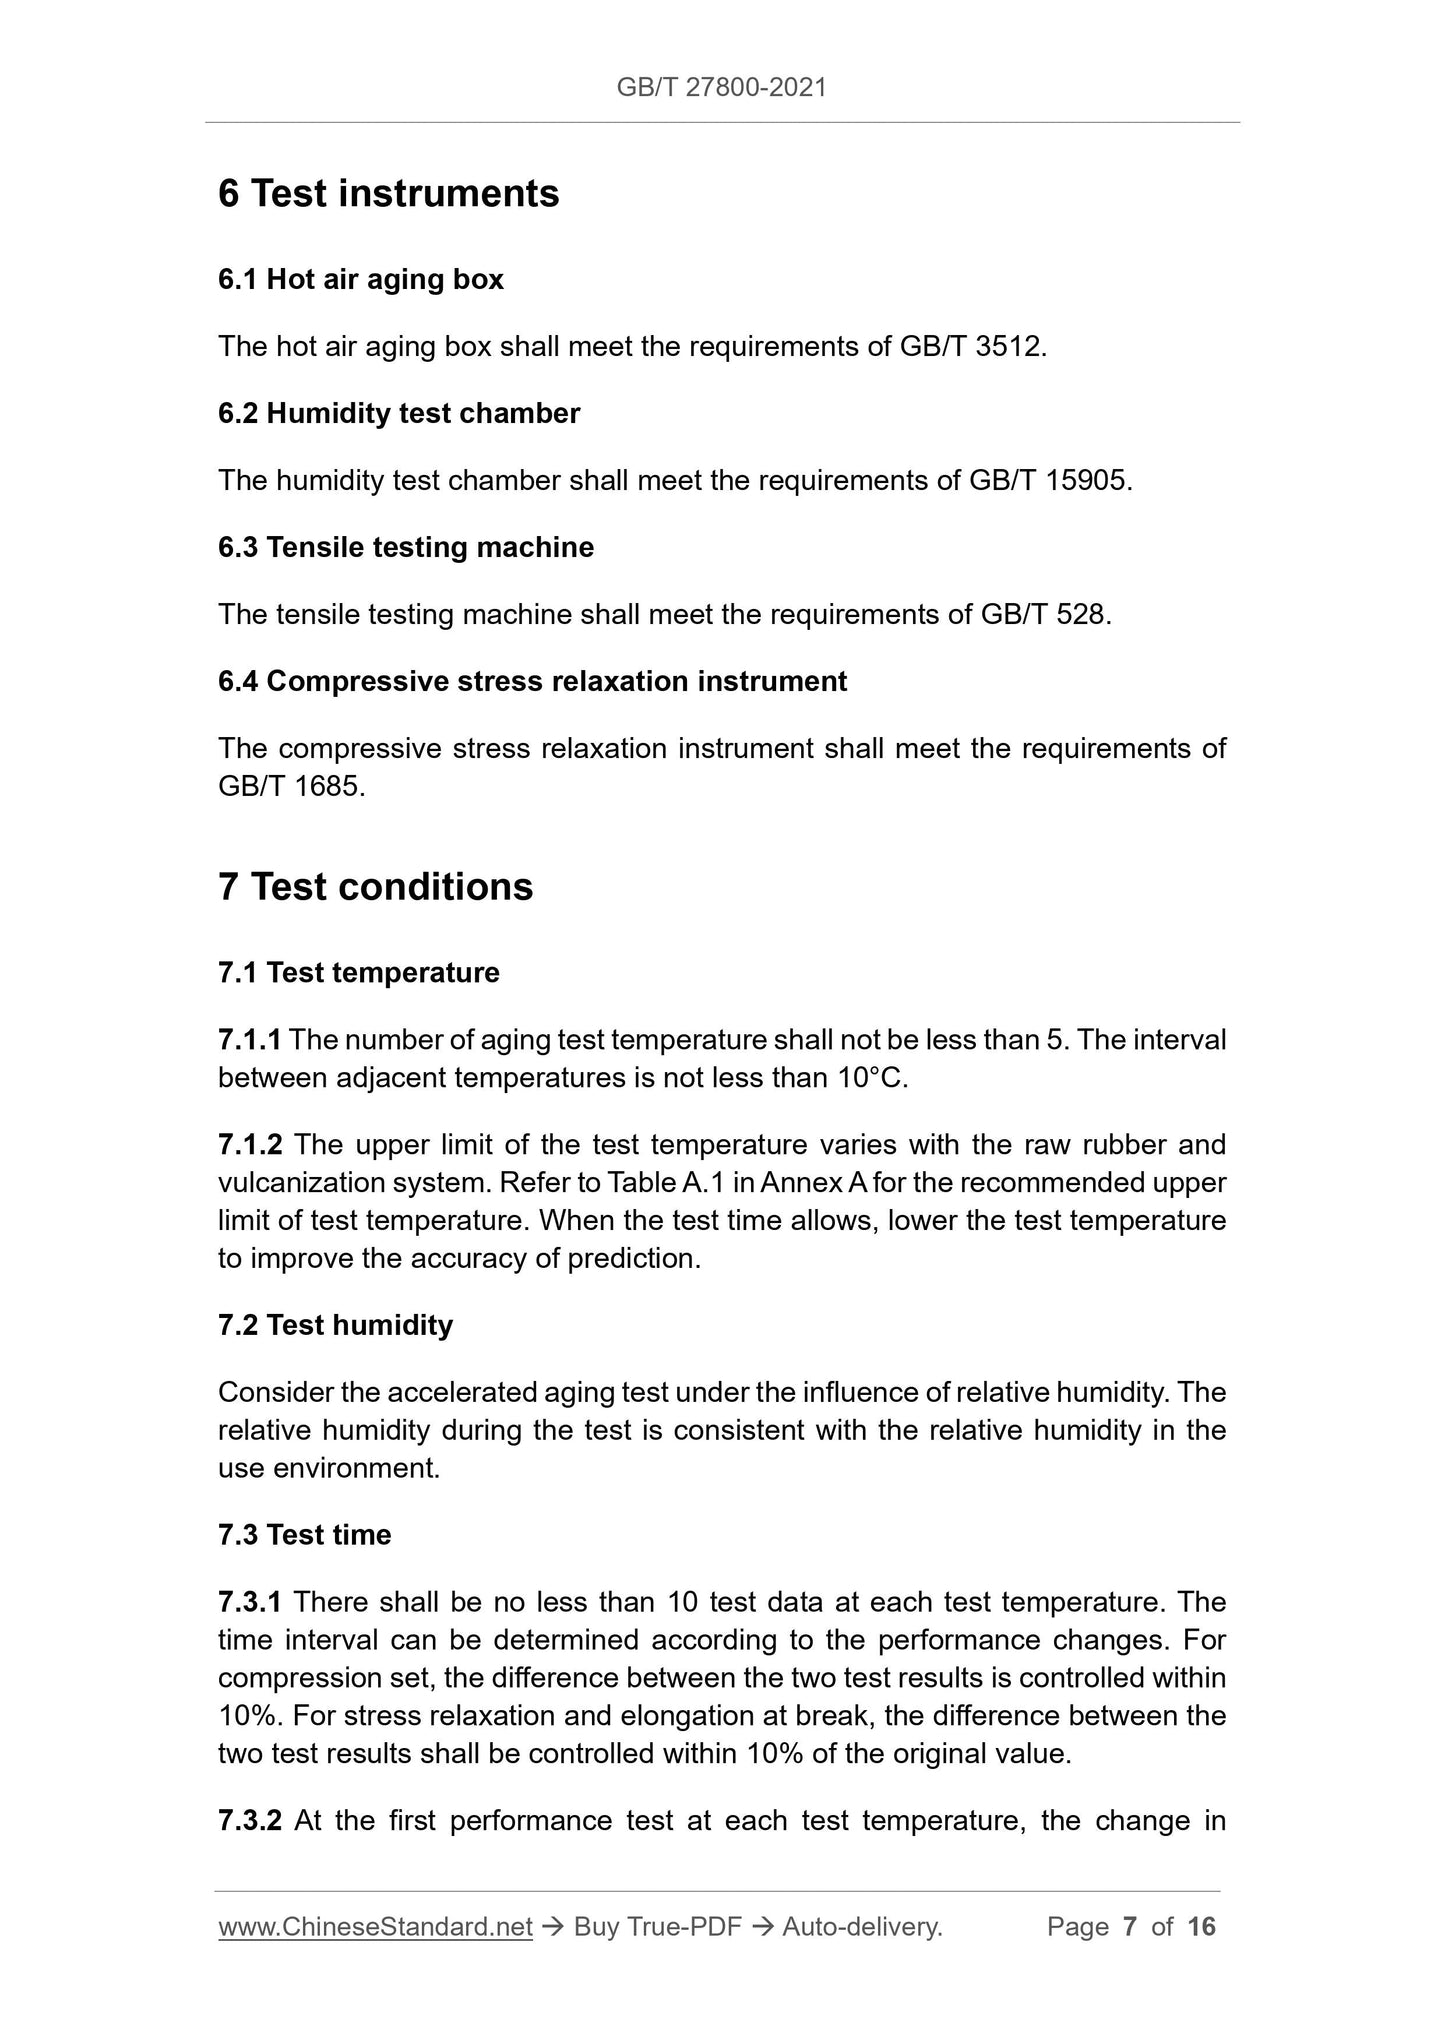 GB/T 27800-2021 Page 4